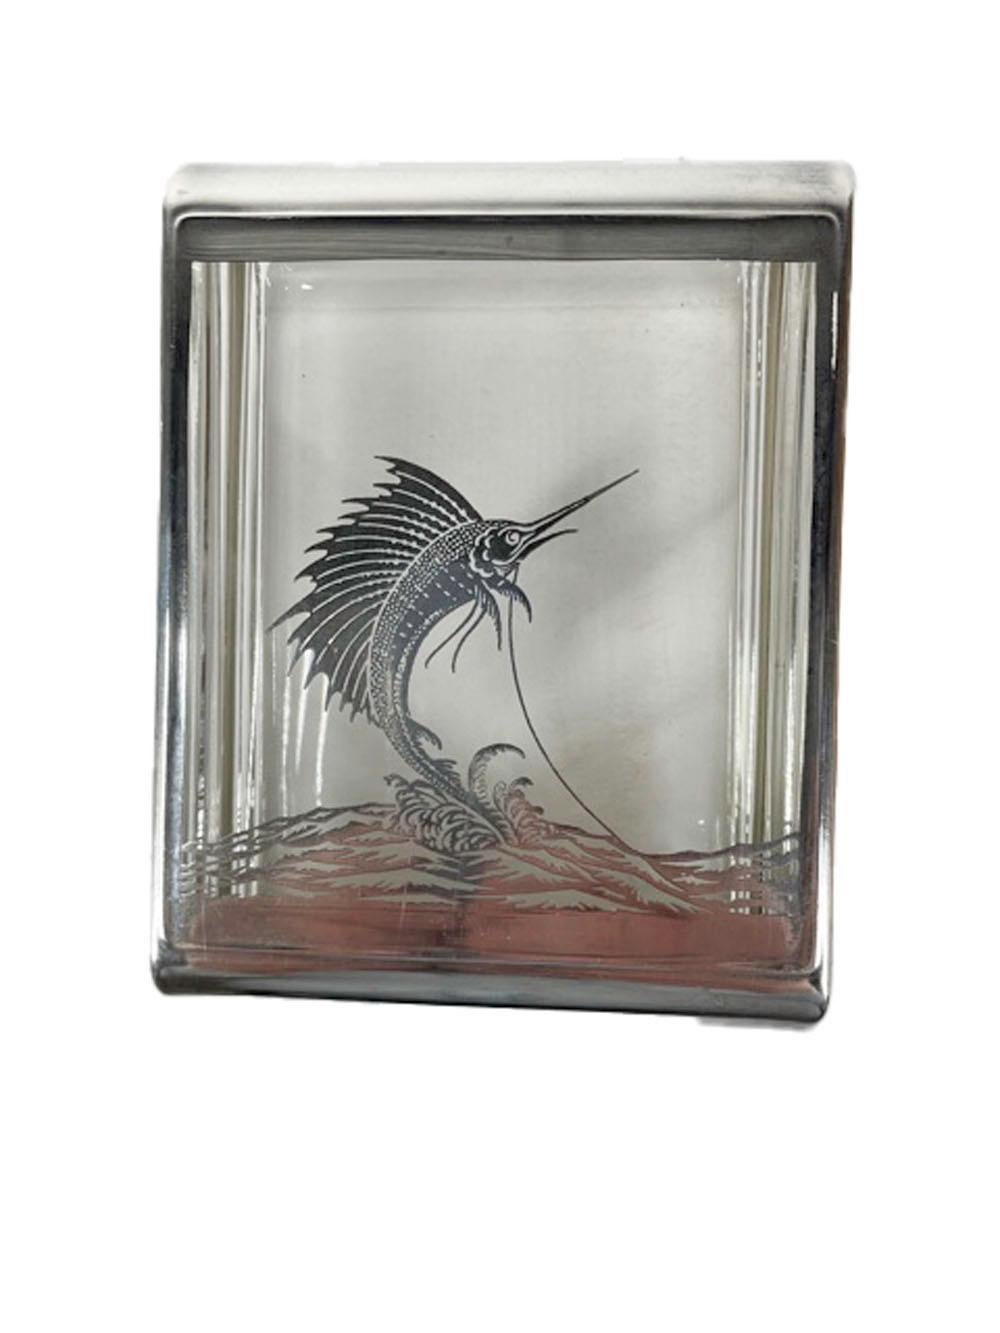 Mid twentieth century glass cigarette box, probably made by Rockwell Silver Company. Made in 2 parts with the top having a sterling overlaid decoration of a sailfish leaping from the water within a silver boarder.